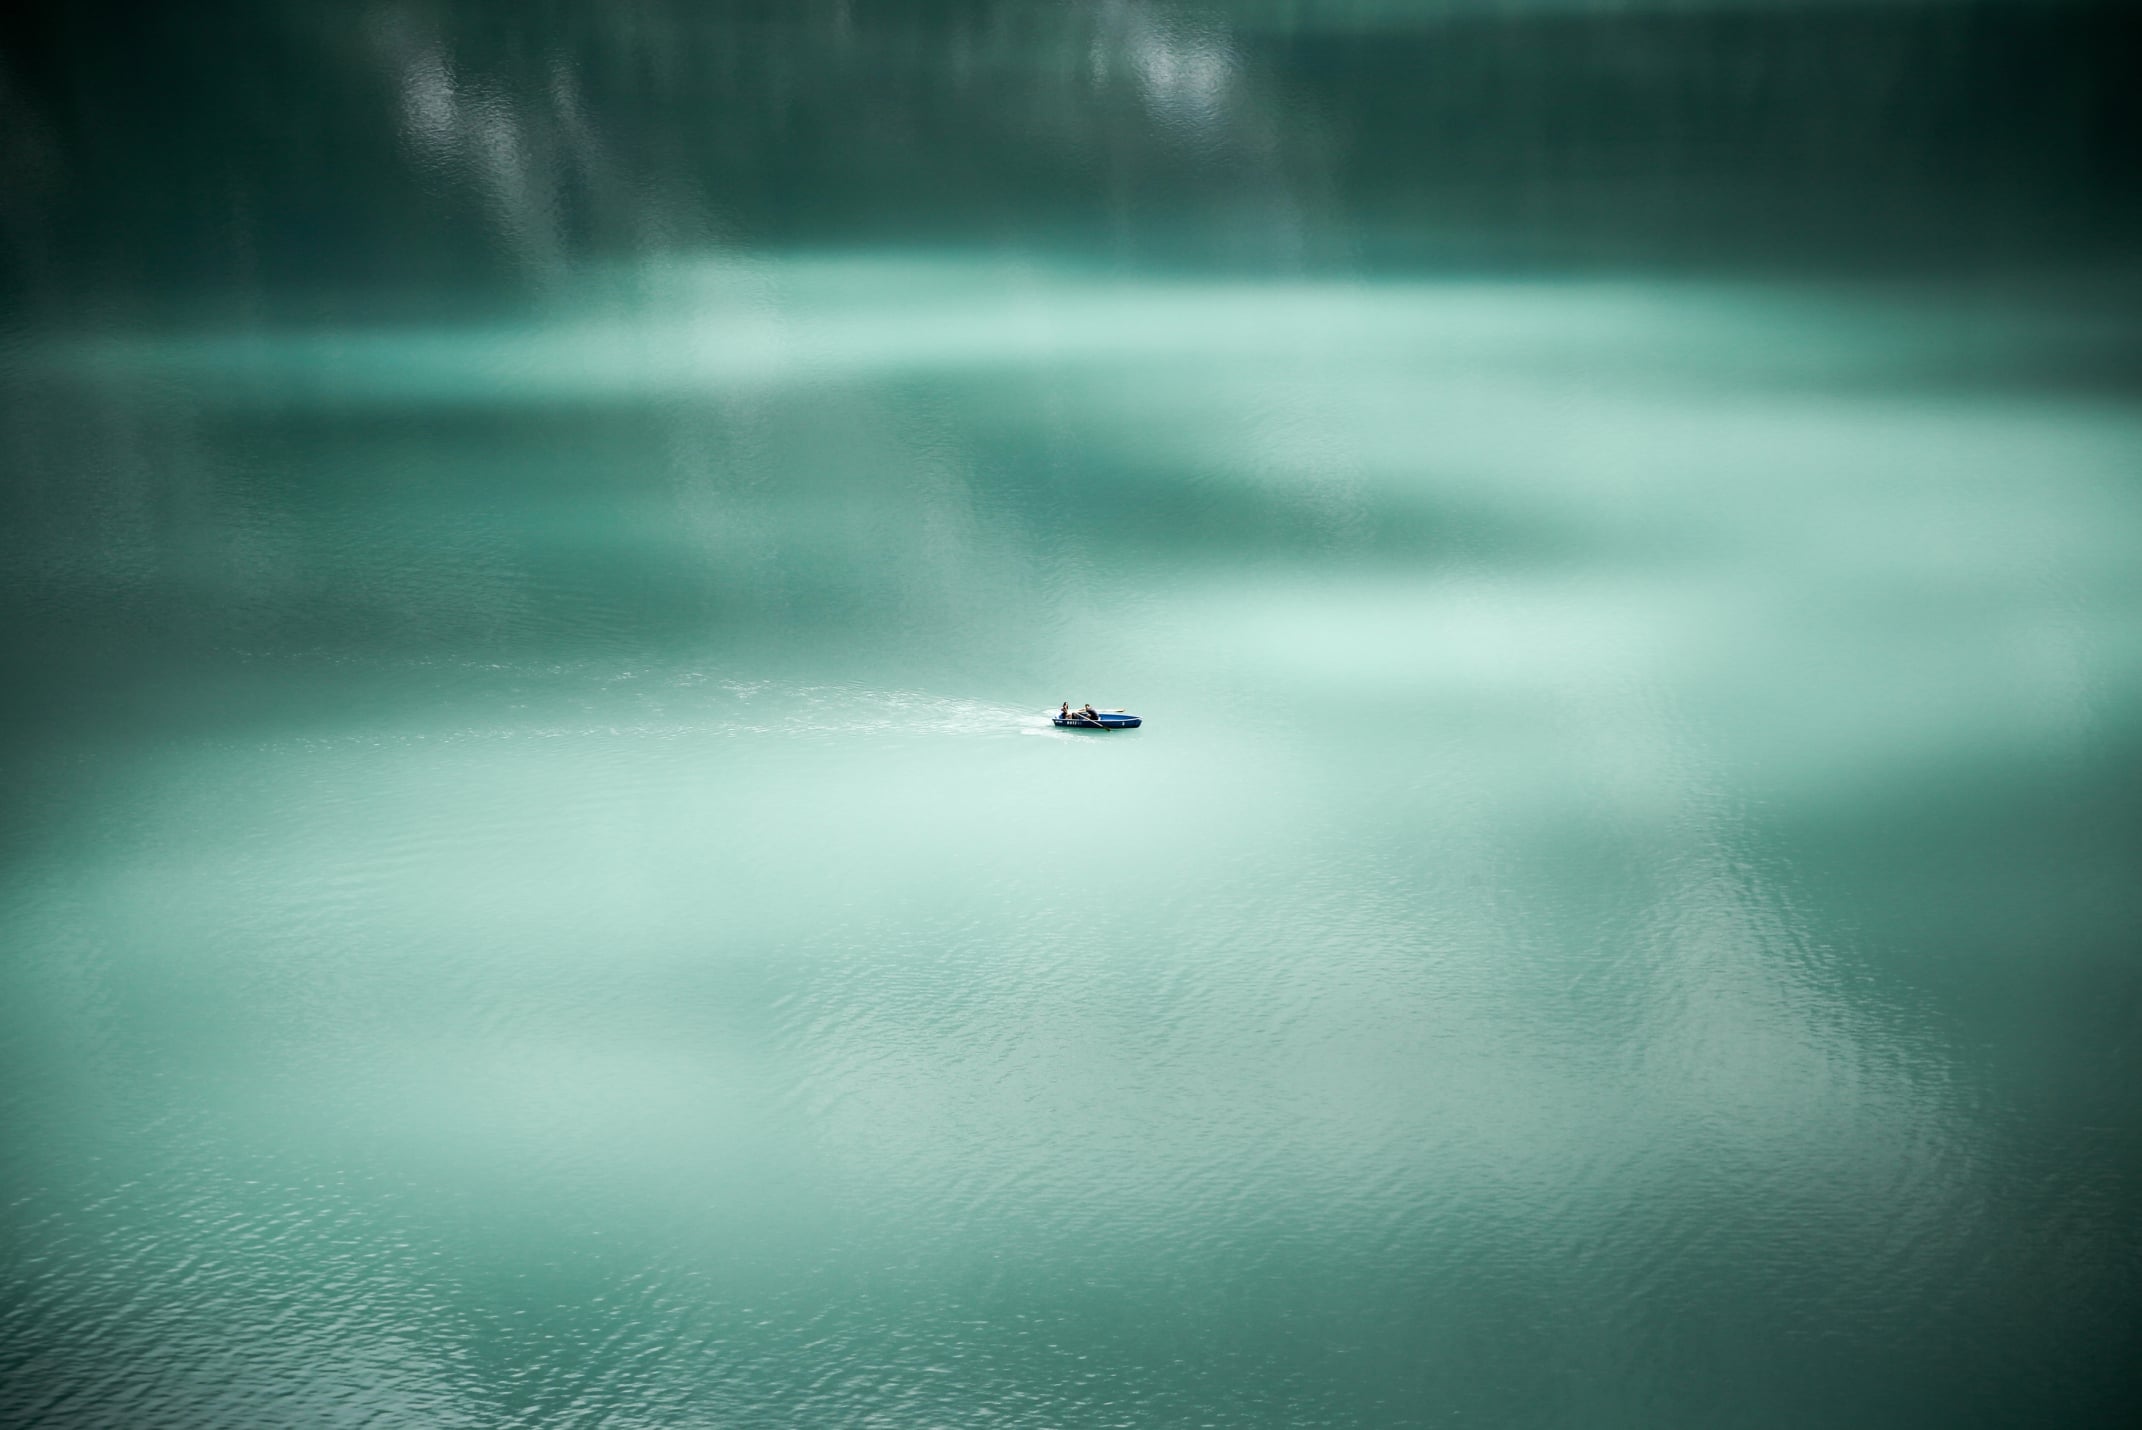 Small boat on a lake